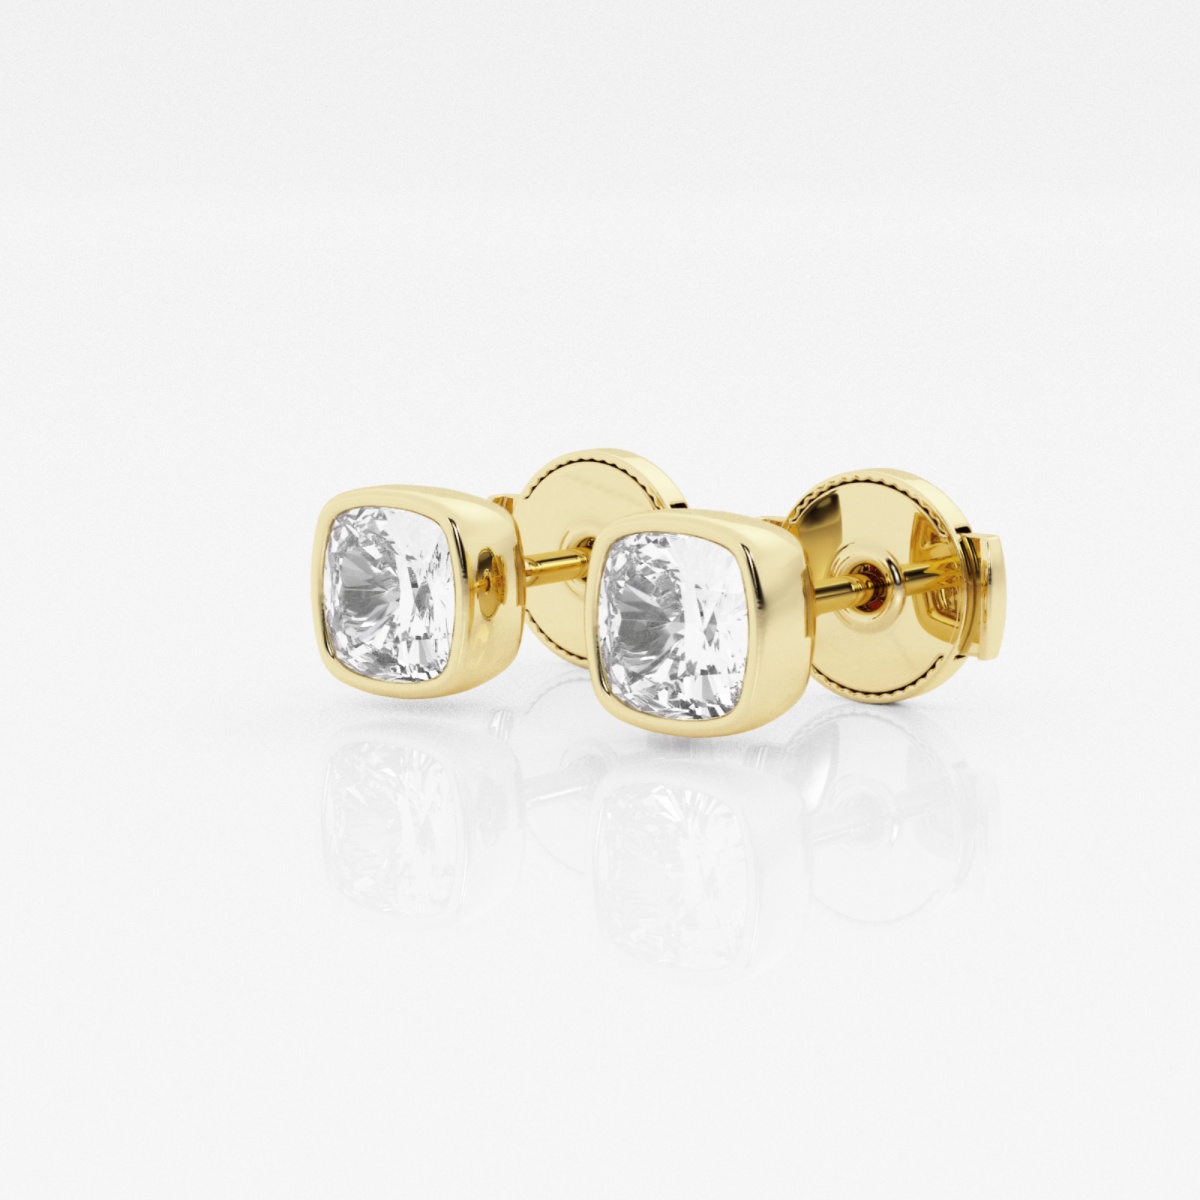 Additional Image 1 for  1 ctw Cushion Lab Grown Diamond Bezel Set Solitaire Stud Earrings